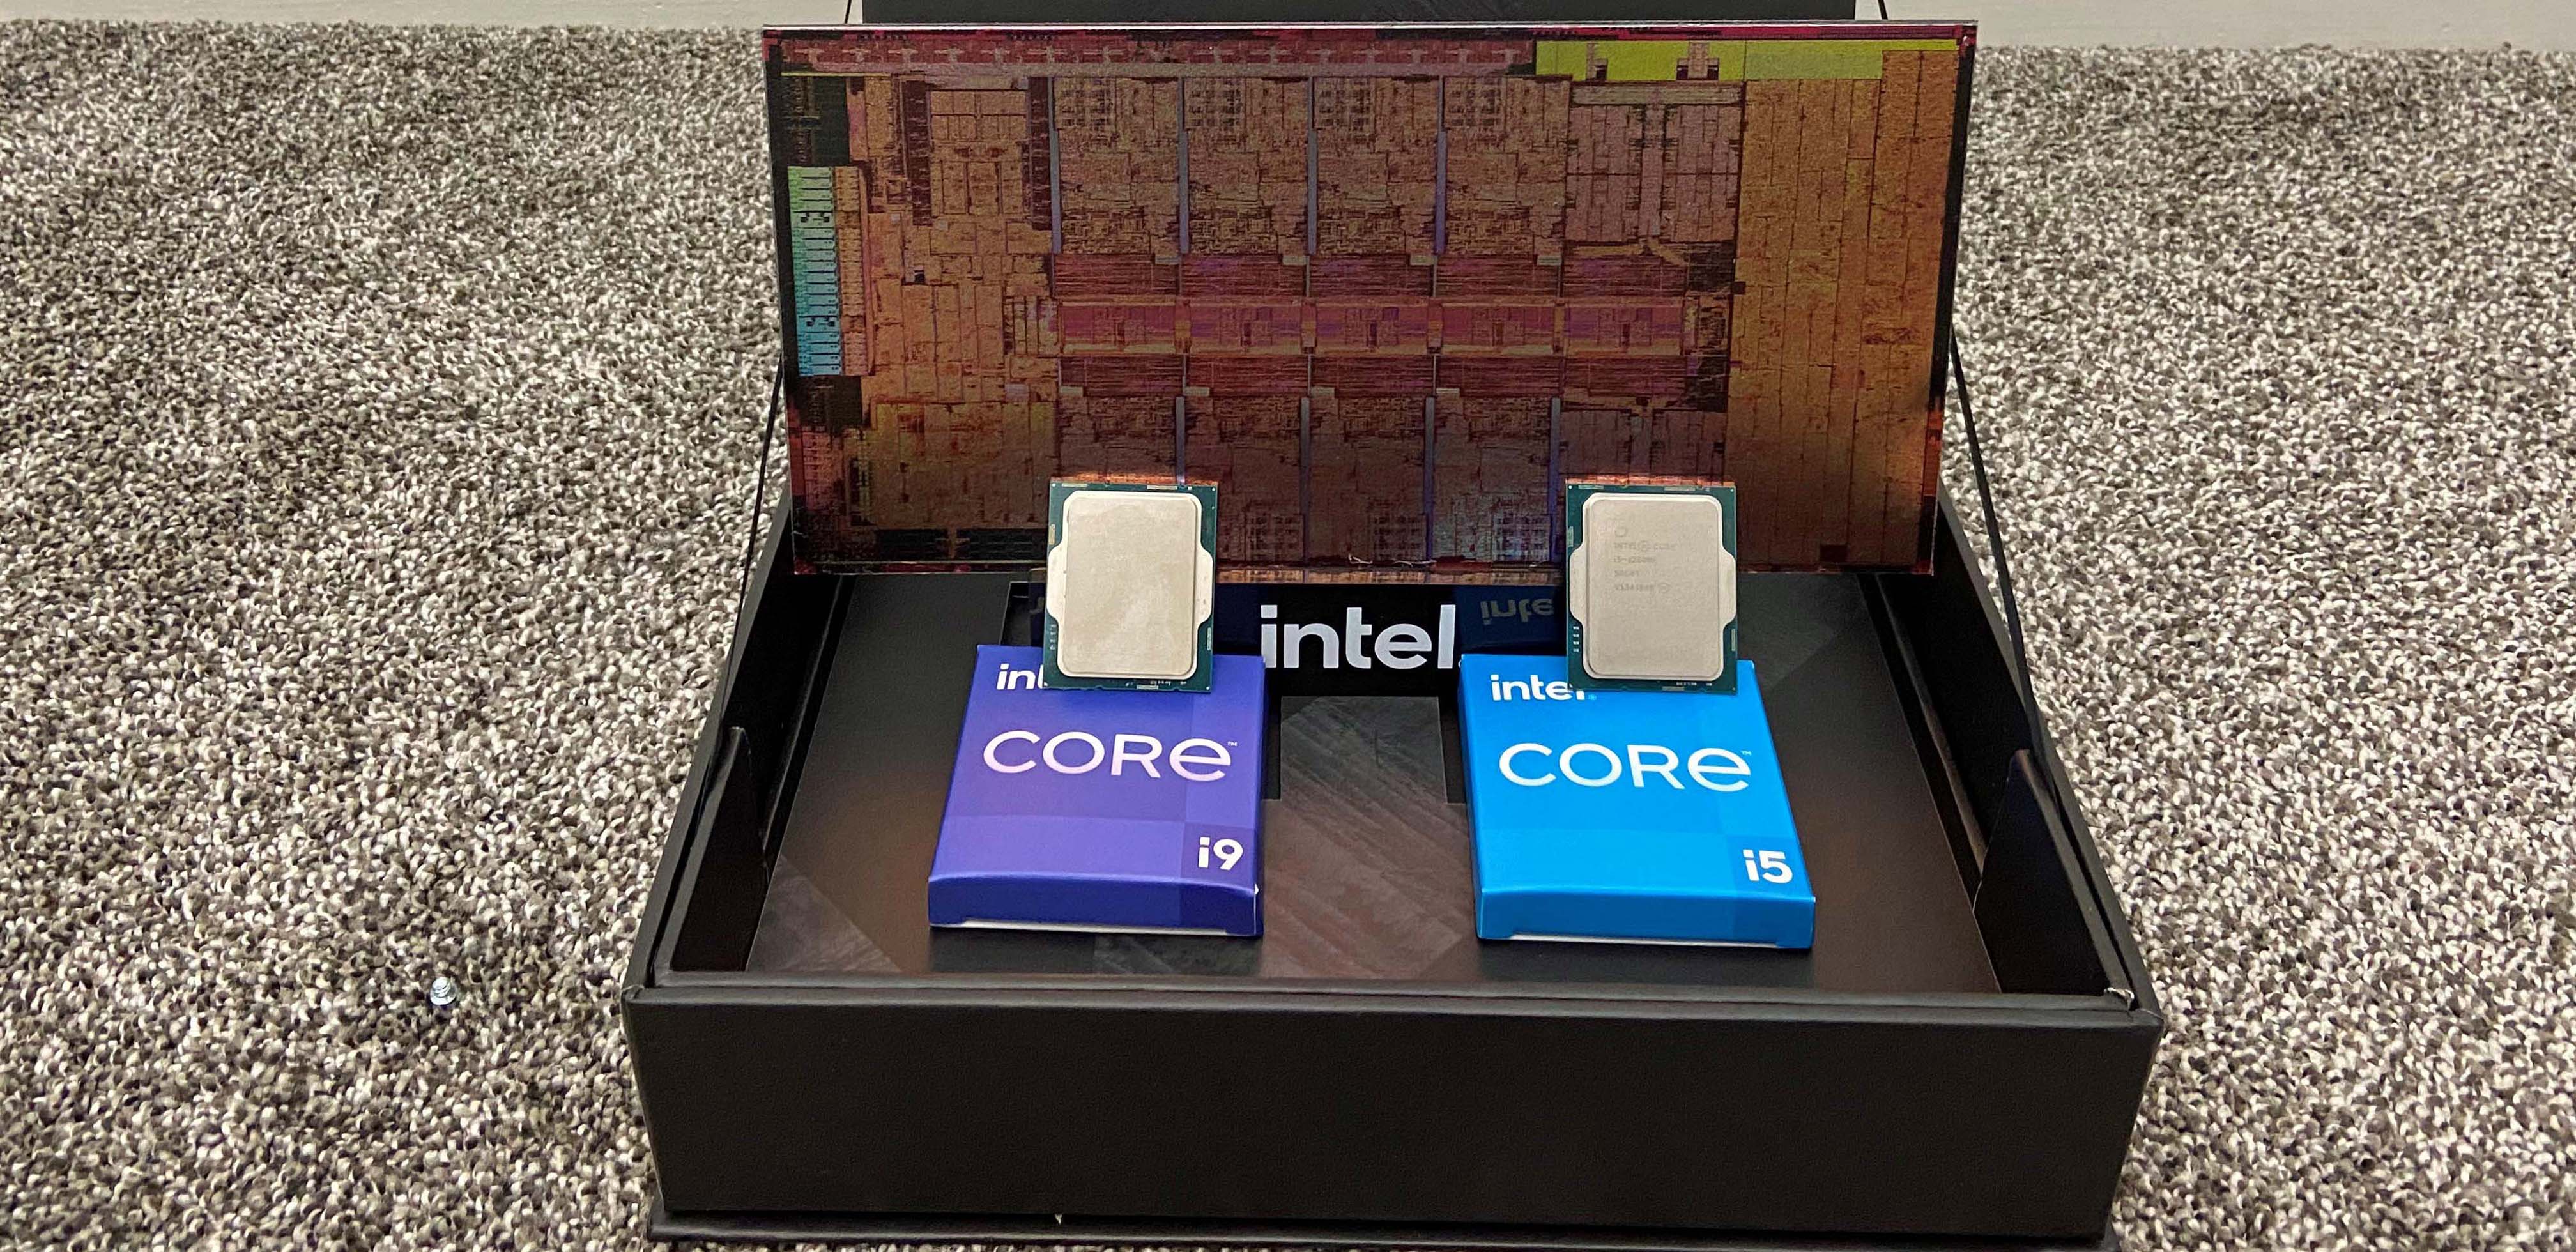 Intel Core i9-12900K and Core i5-12600K Gaming CPUs Review Tom's Hardware